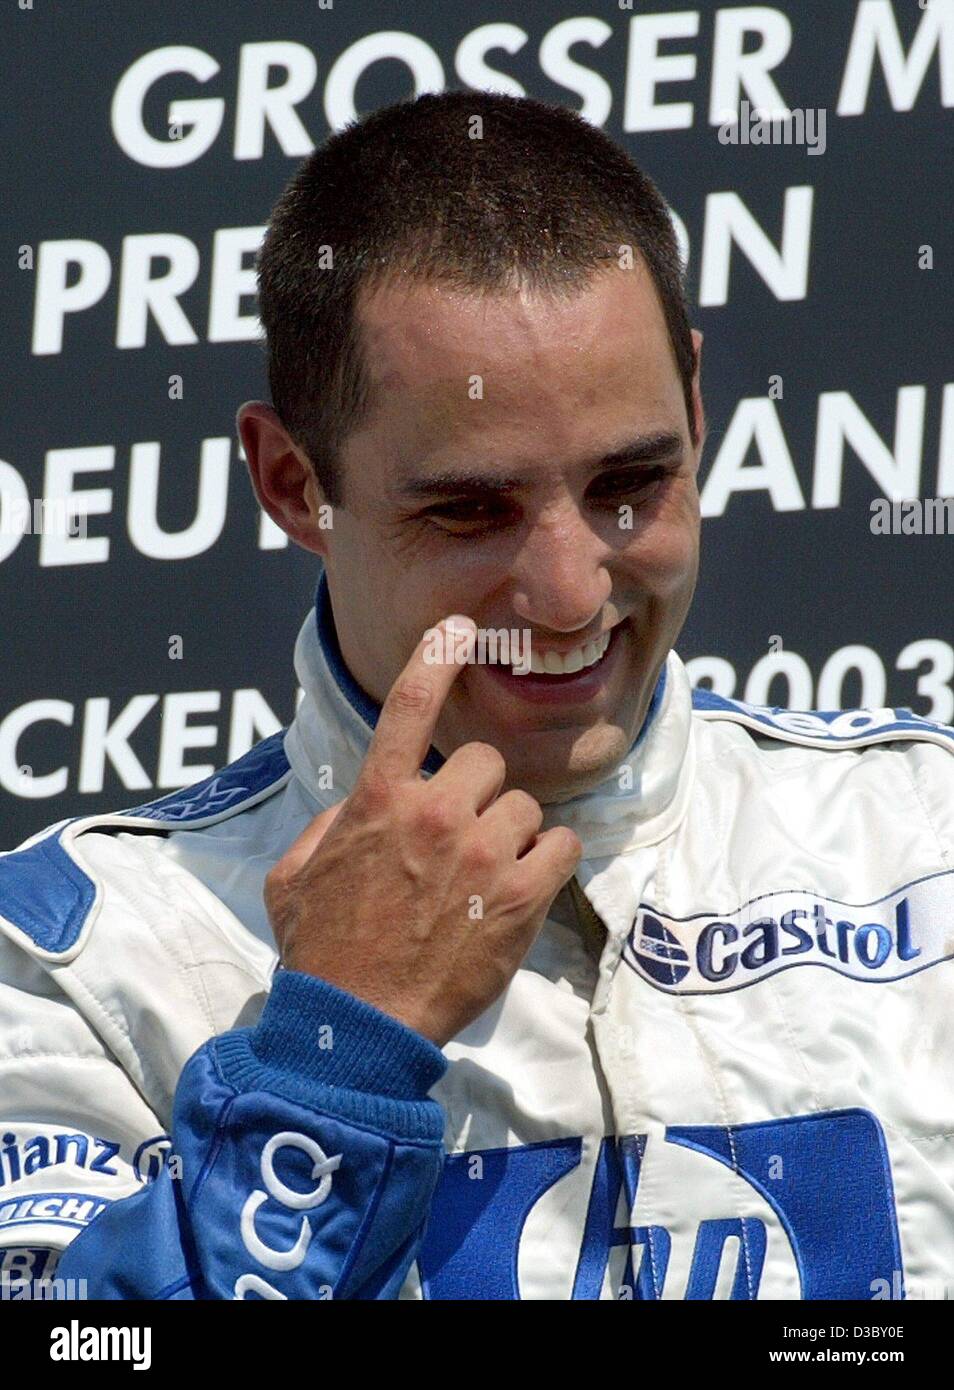 (dpa) - Colombian Juan Pablo Montoya of BMW-Williams smiles after winning the Formula One Grand Prix of Germany at the Hockenheim race track in Hockenheim, Germany, 3 August 2003. With 65 points Montoya ranks now on 2nd place in the overall standings. Stock Photo